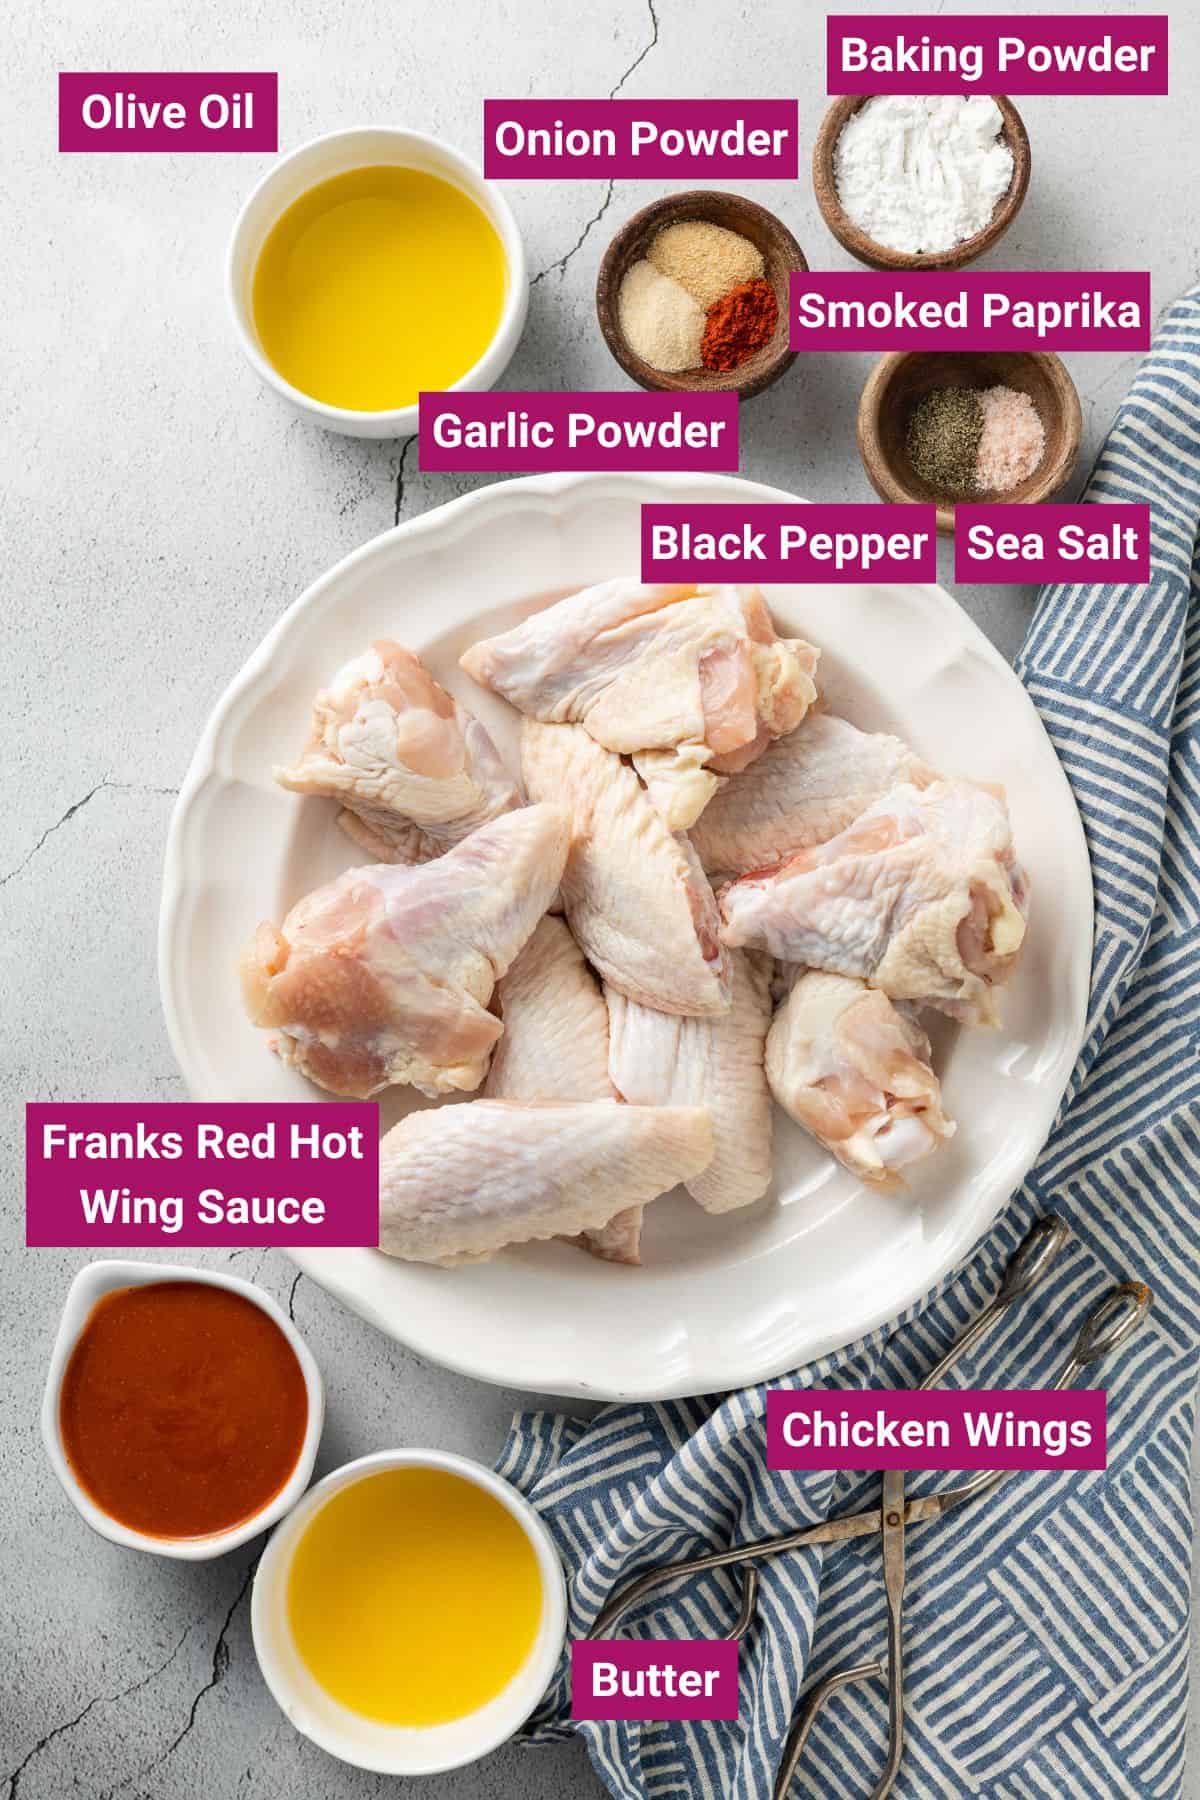 ingredients needed to make crispy buffalo wings: olive oil, spices, black pepper, sea salt, hot wings sauce, chicken wings, melted butter on separate bowls